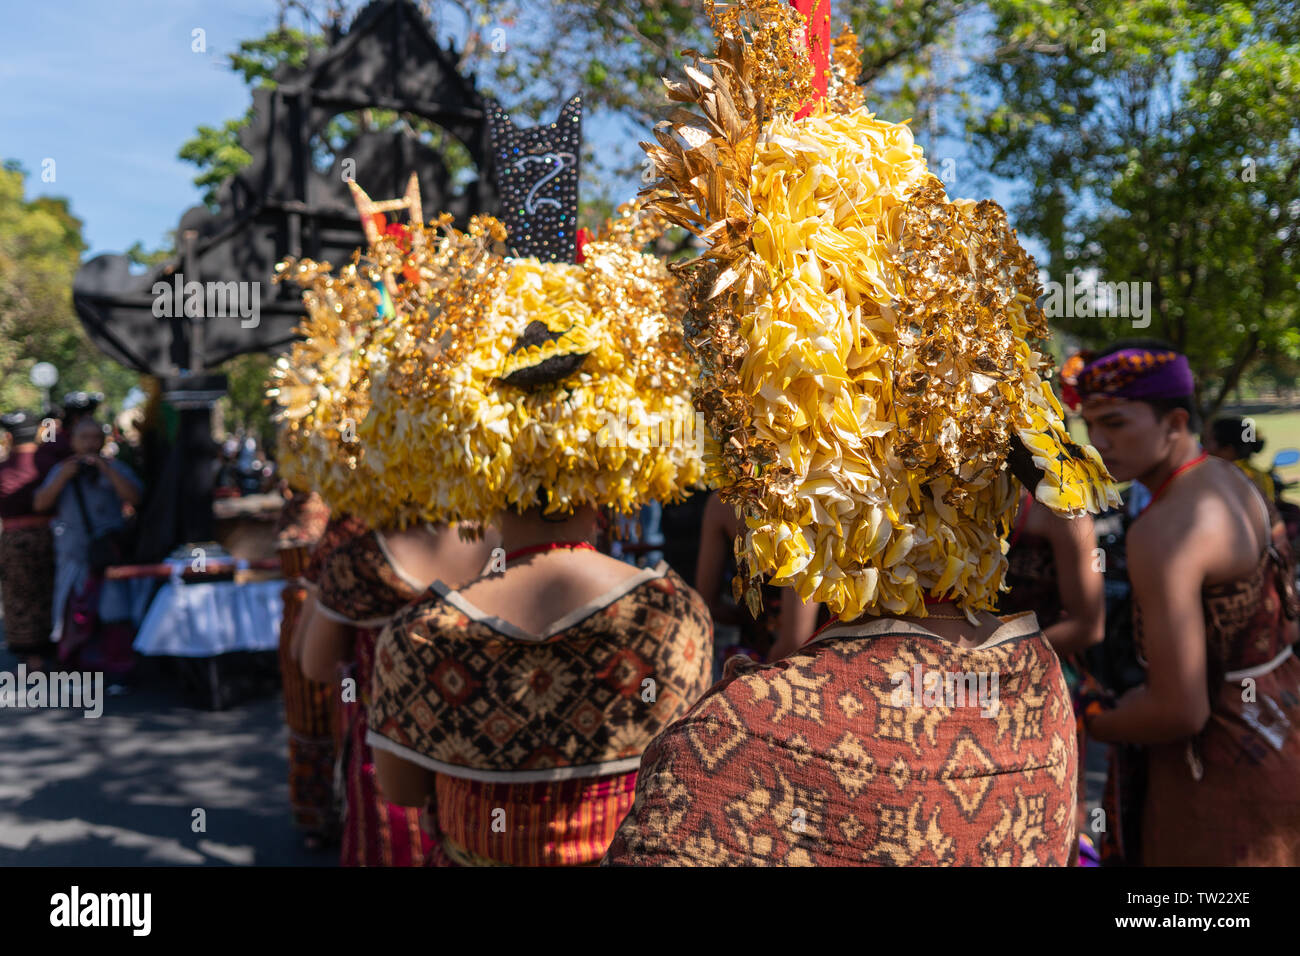 Young Balinese women wearing traditional Balinese headdress and traditional sarong at the opening ceremony of the Bali Art Festival 2019. This is free Stock Photo